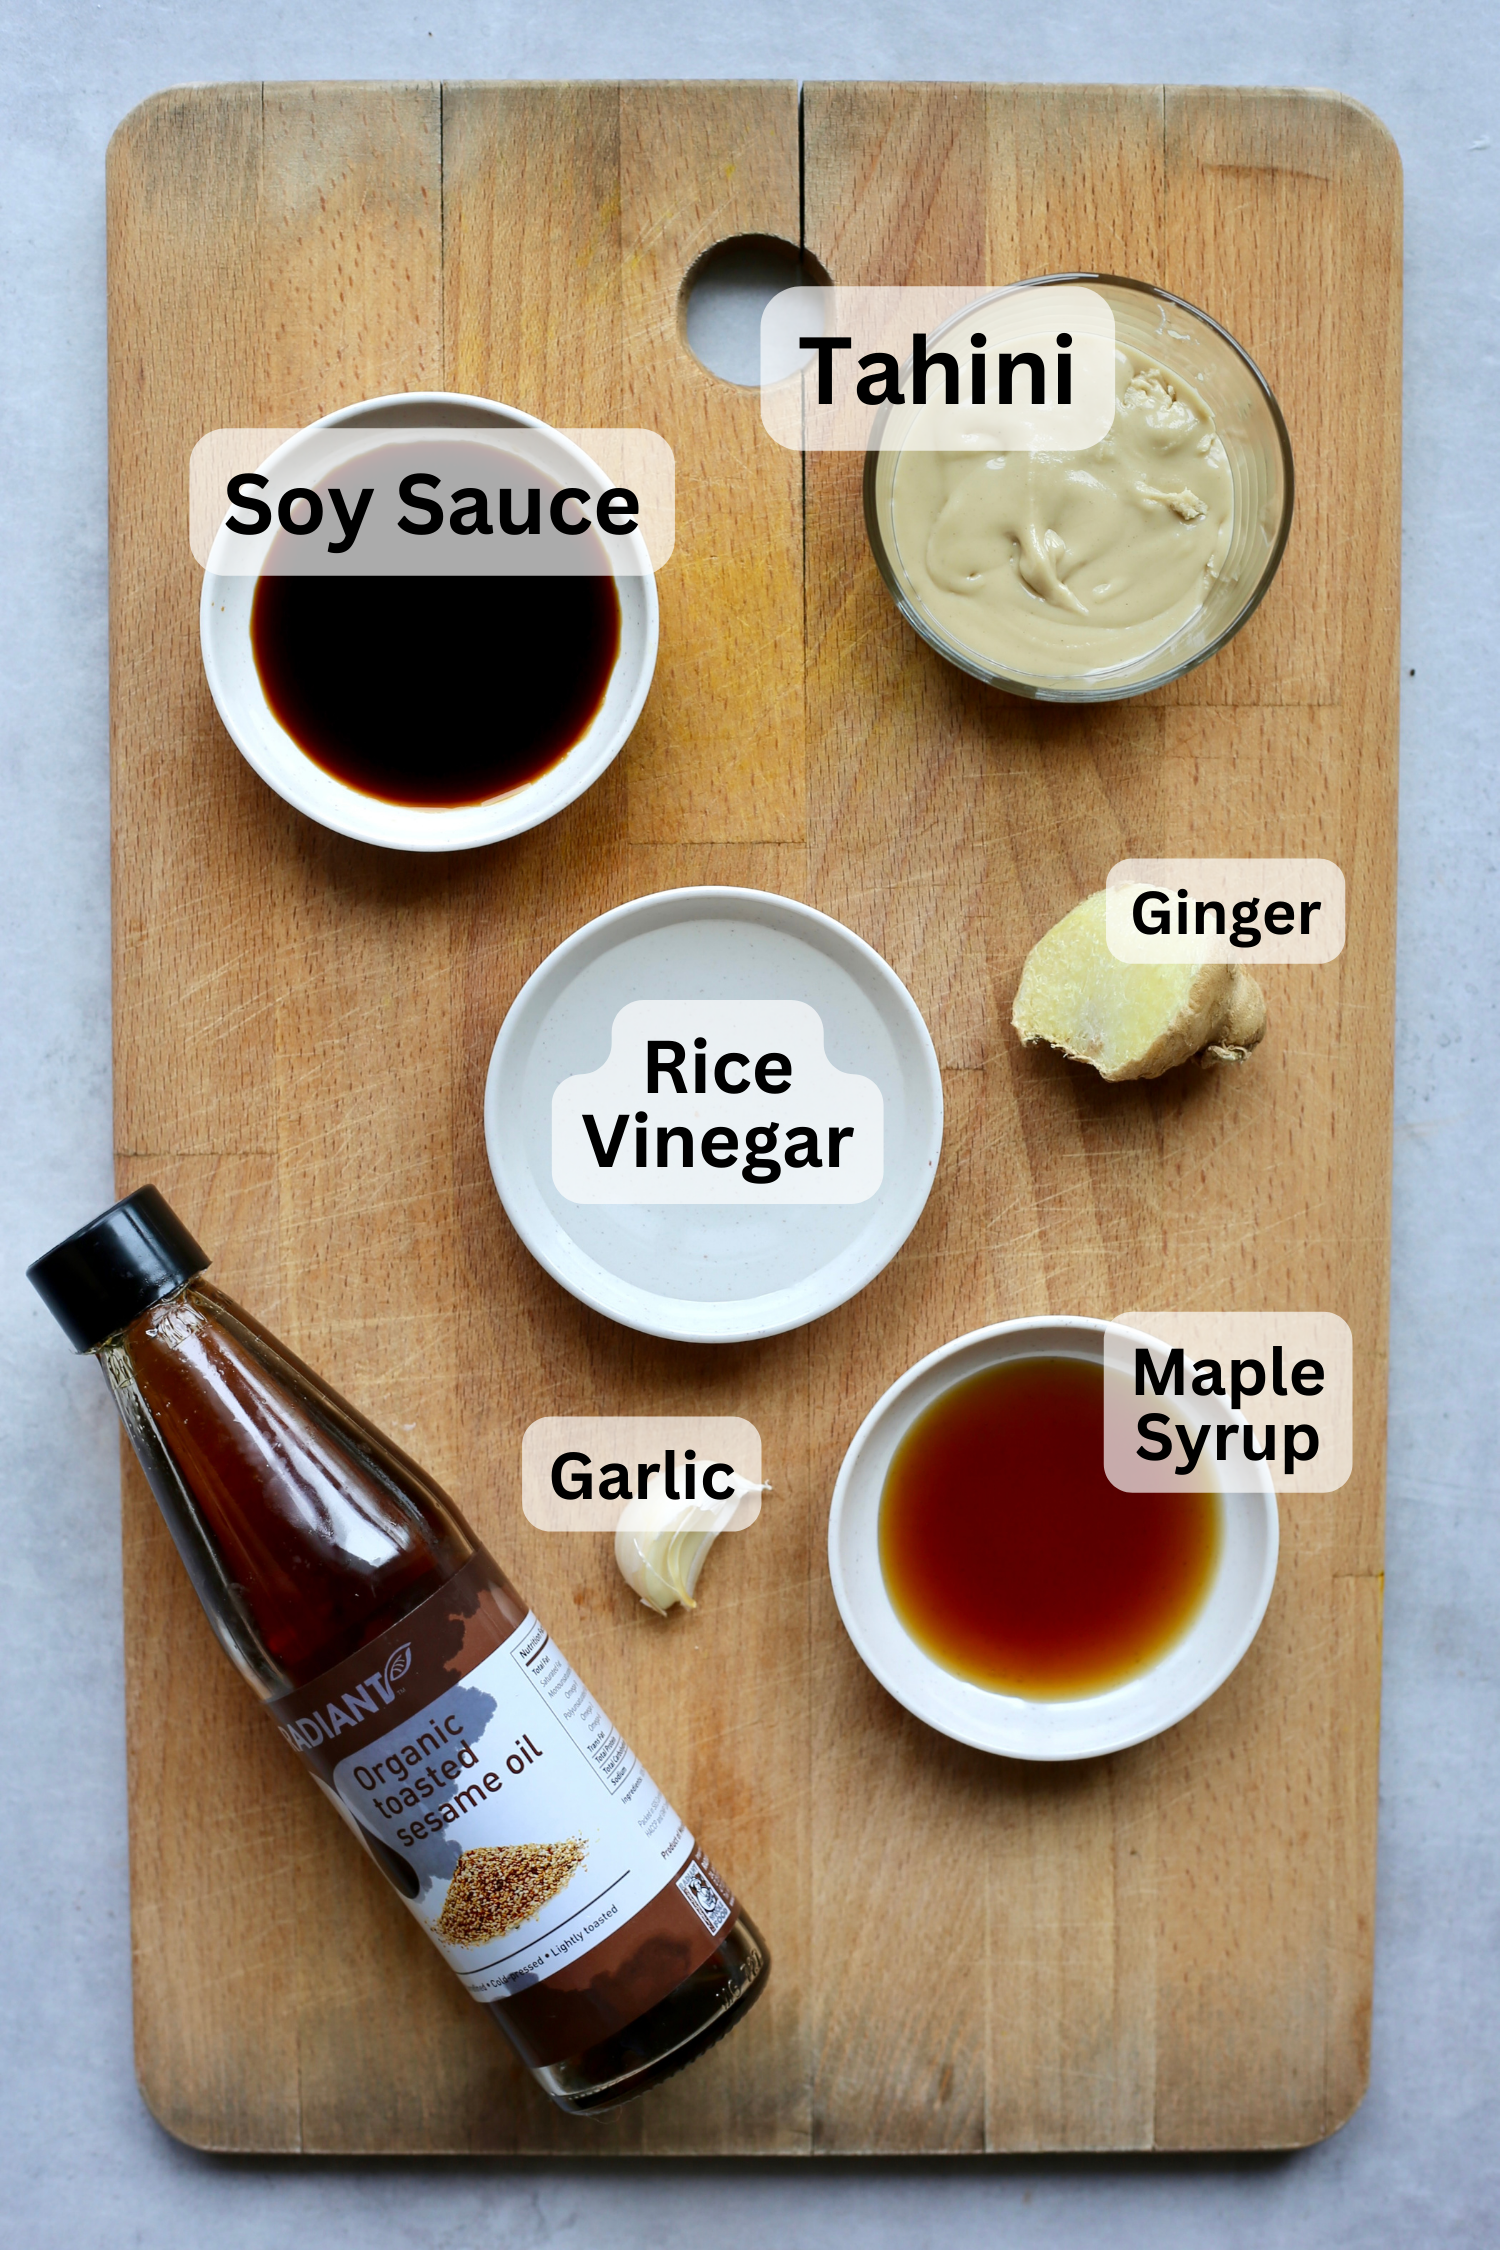 Tahini, soy sauce, rice vinegar, ginger, maple syrup, sesame oil, and garlic crackers are spread on a wooden cutting board to make the sauce. 